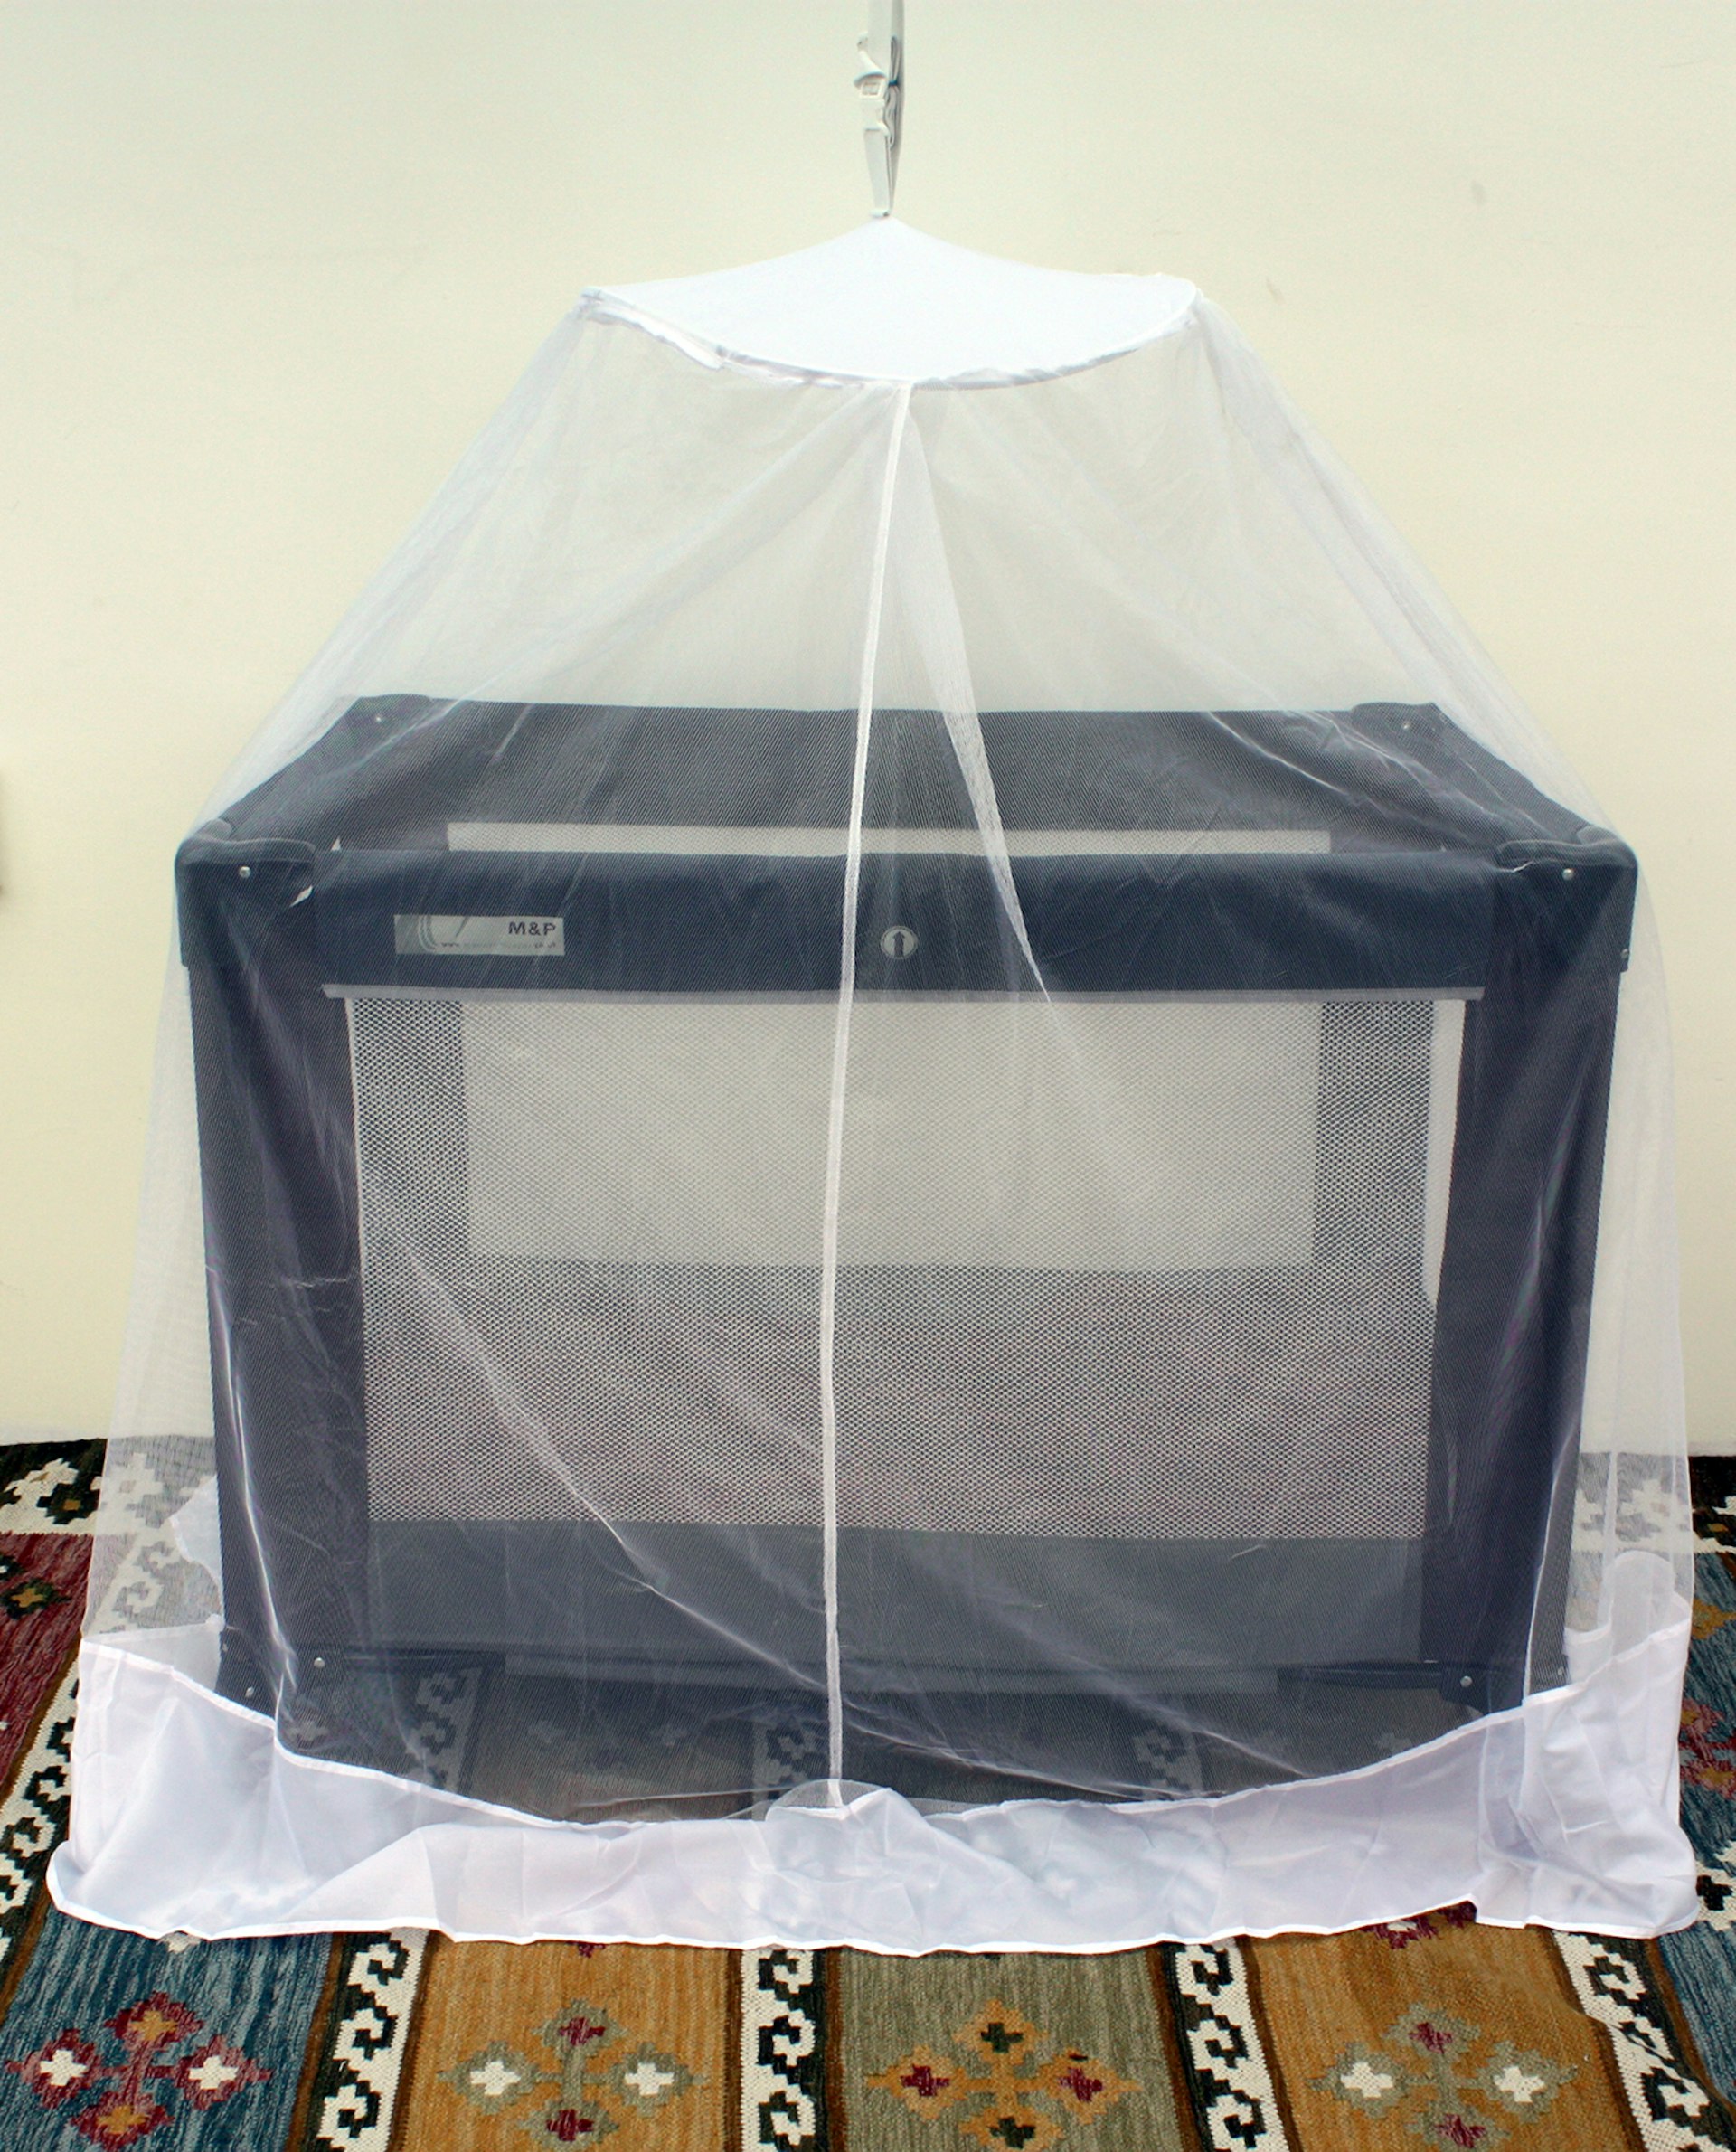 Pyramid’s Cot Bell mosquito net © David Else / Lonely Planet